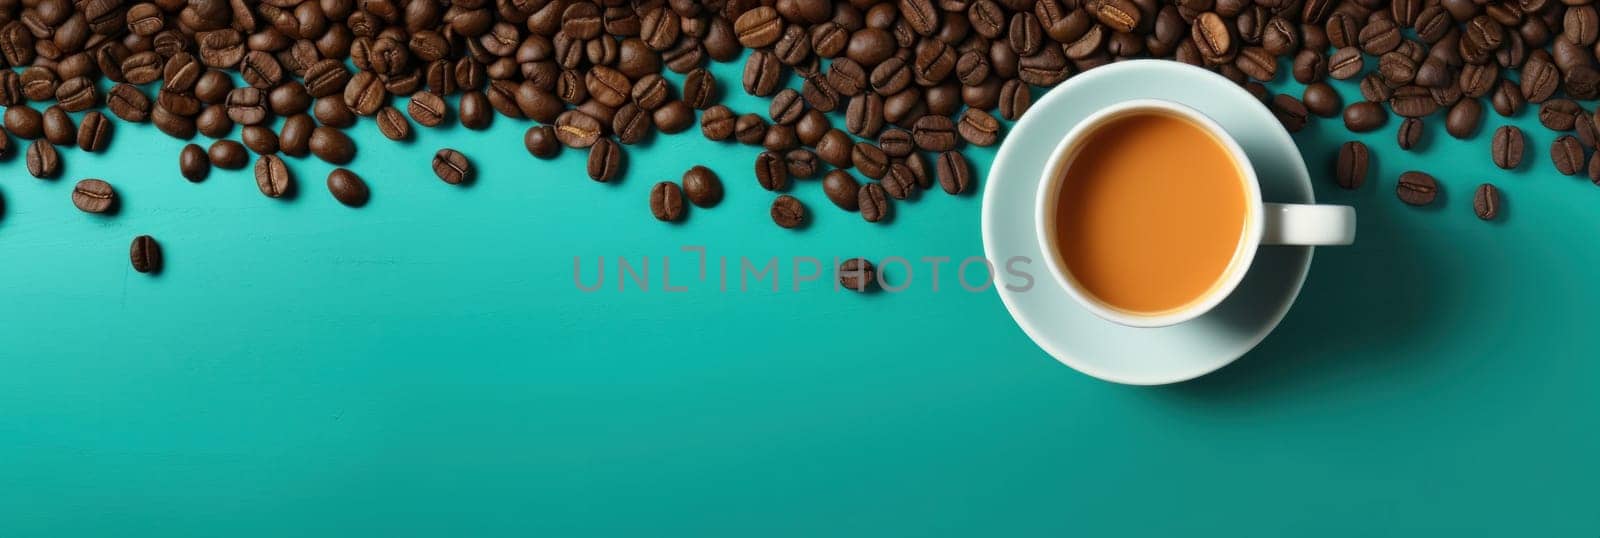 A cup of coffee on a blue background with beans around it